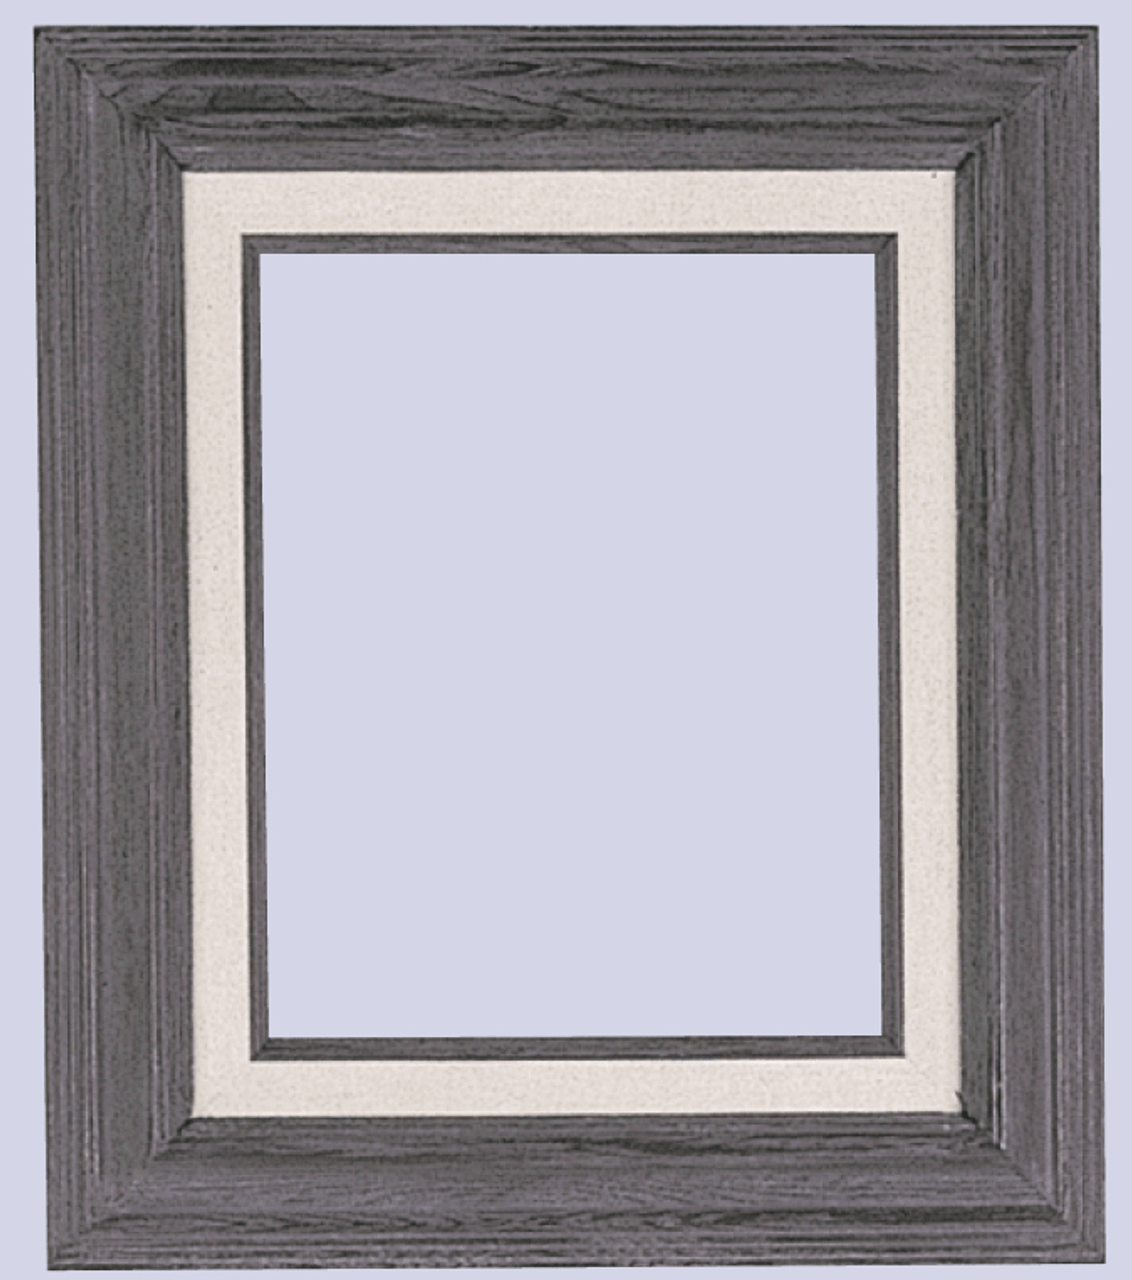  3 Inch Econo Wood Frames With Linen Liners: 4X7*